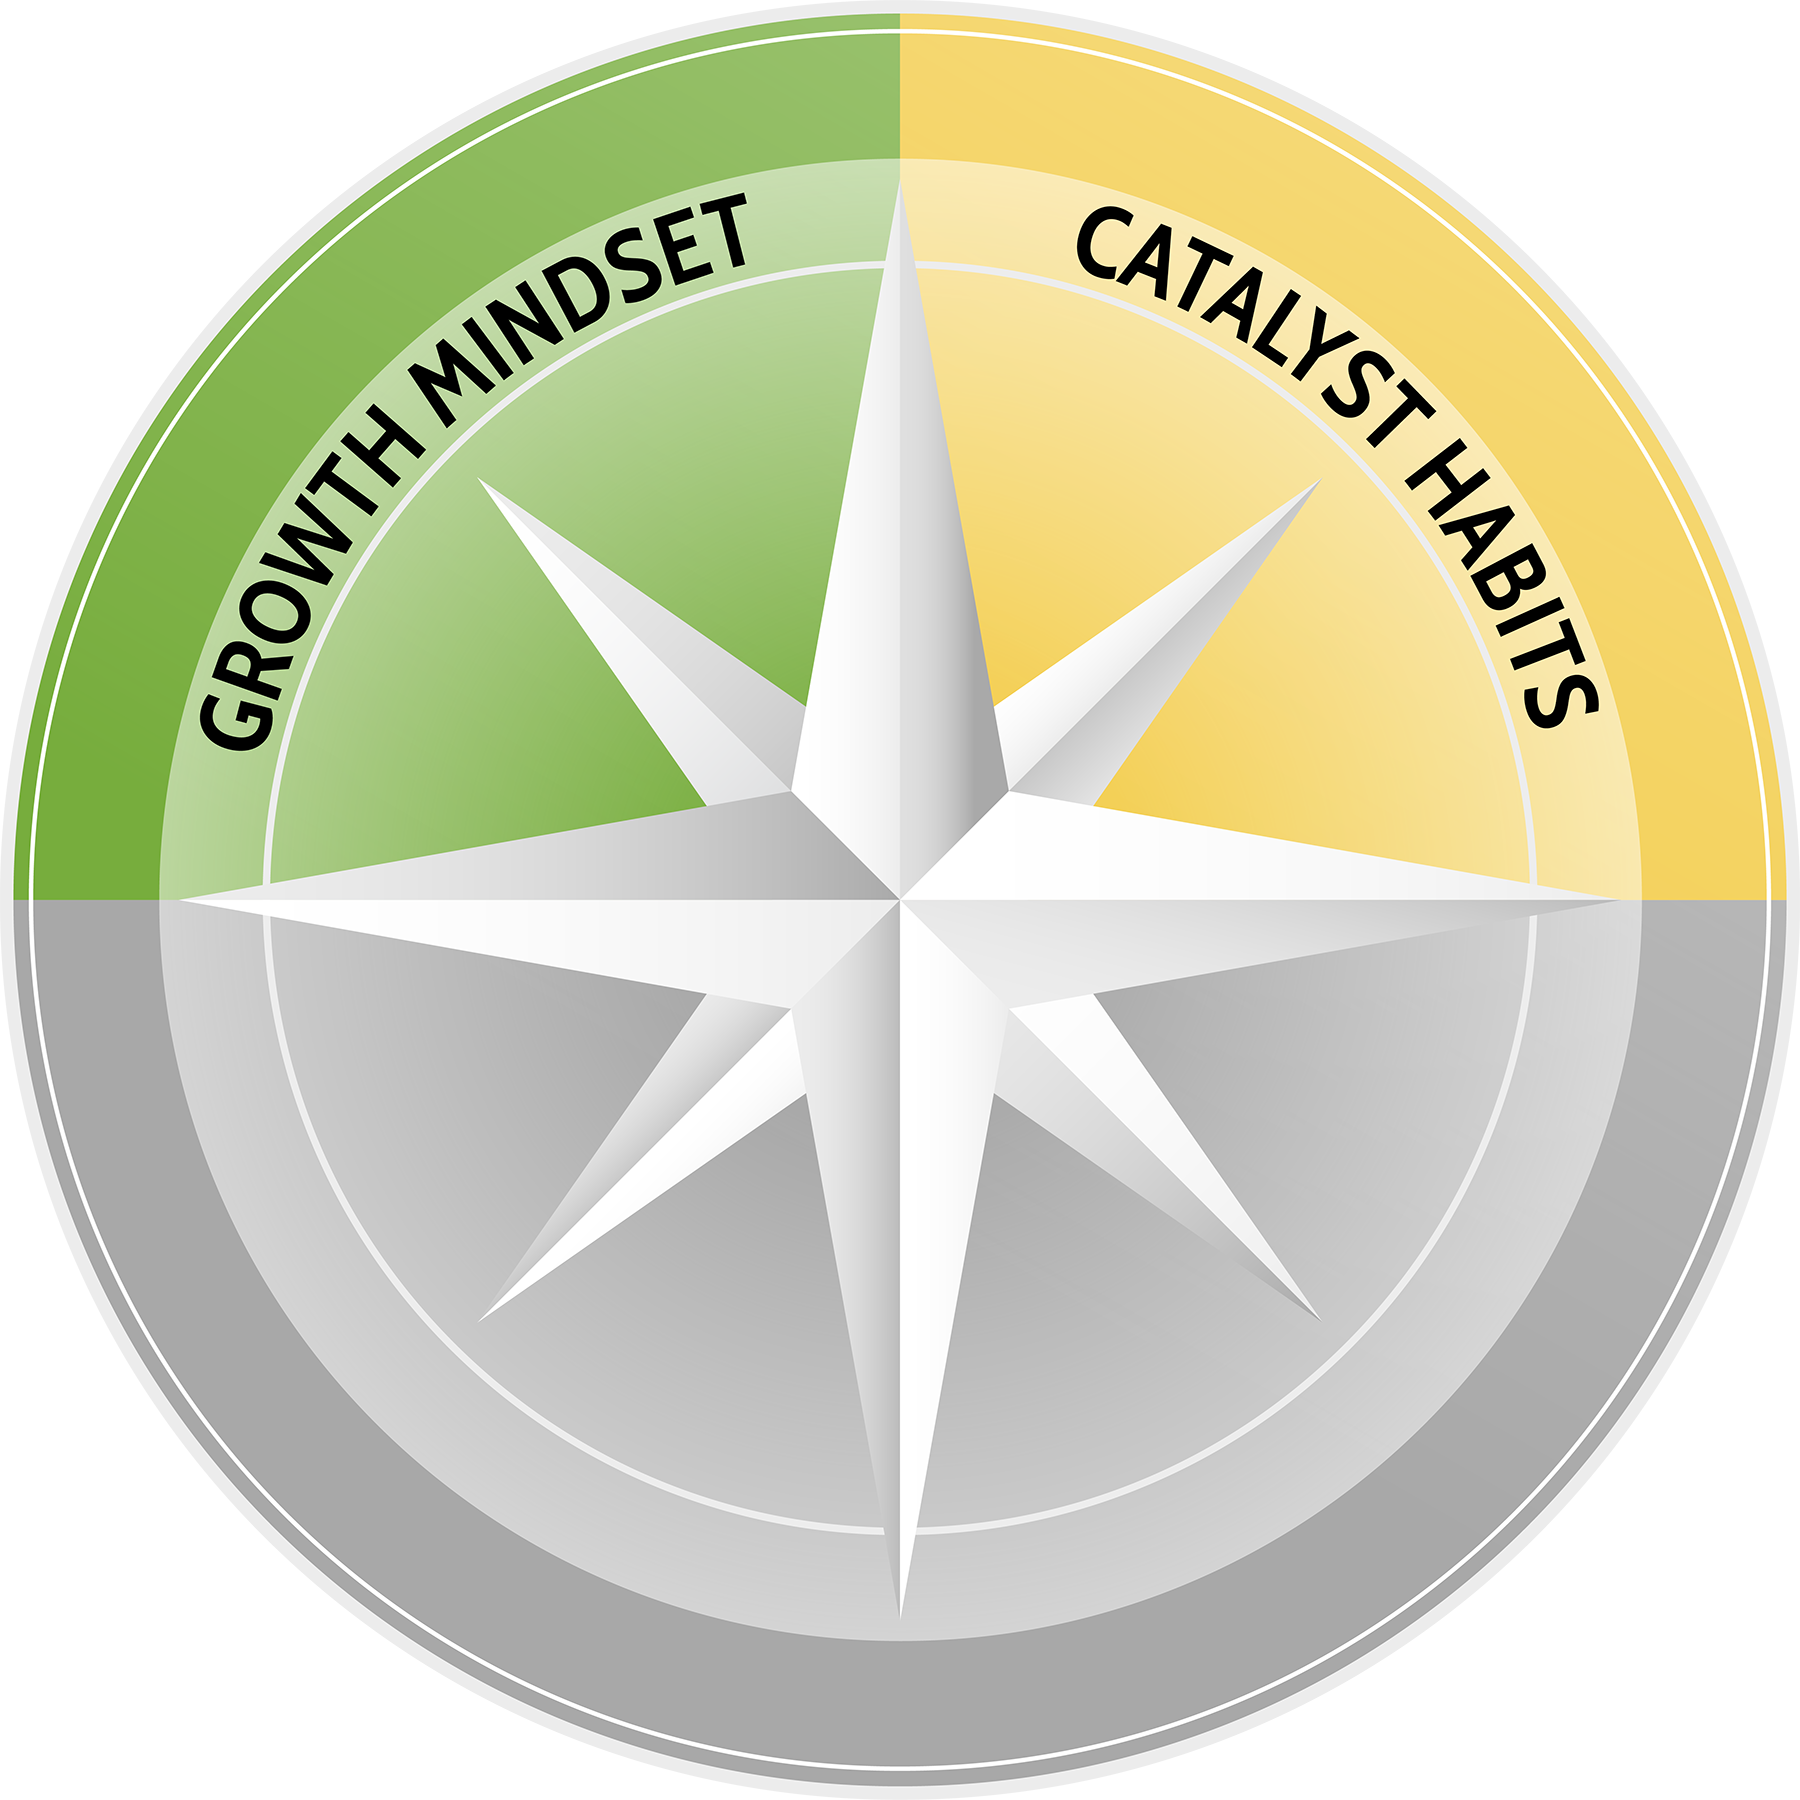 the top half of the leadership journey compass in color with the words growth mindset and catalyst habits; the bottom half of the compass is in grey scale without words